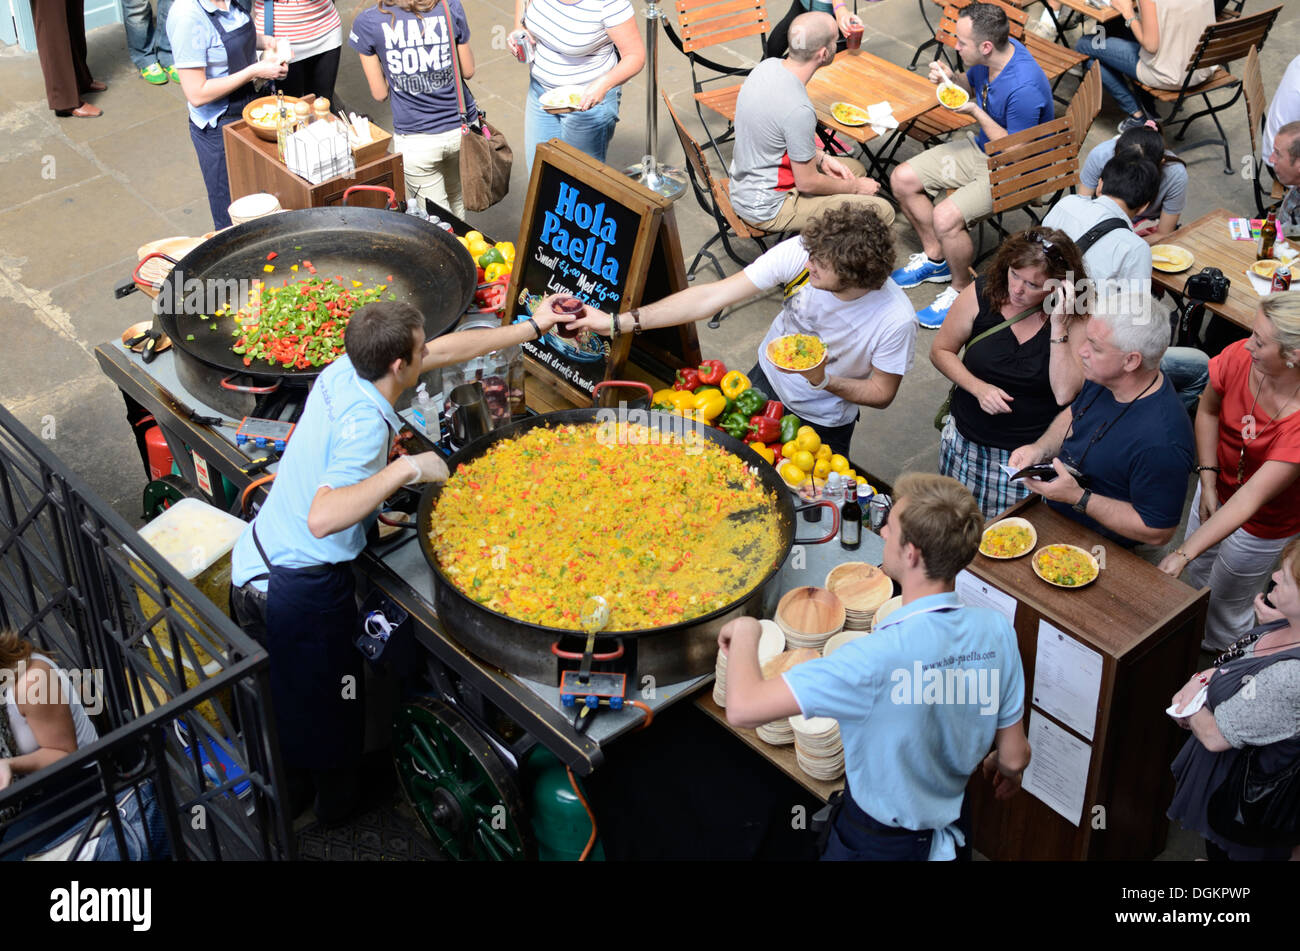 Paella stall in Old Covent Garden Market. Stock Photo